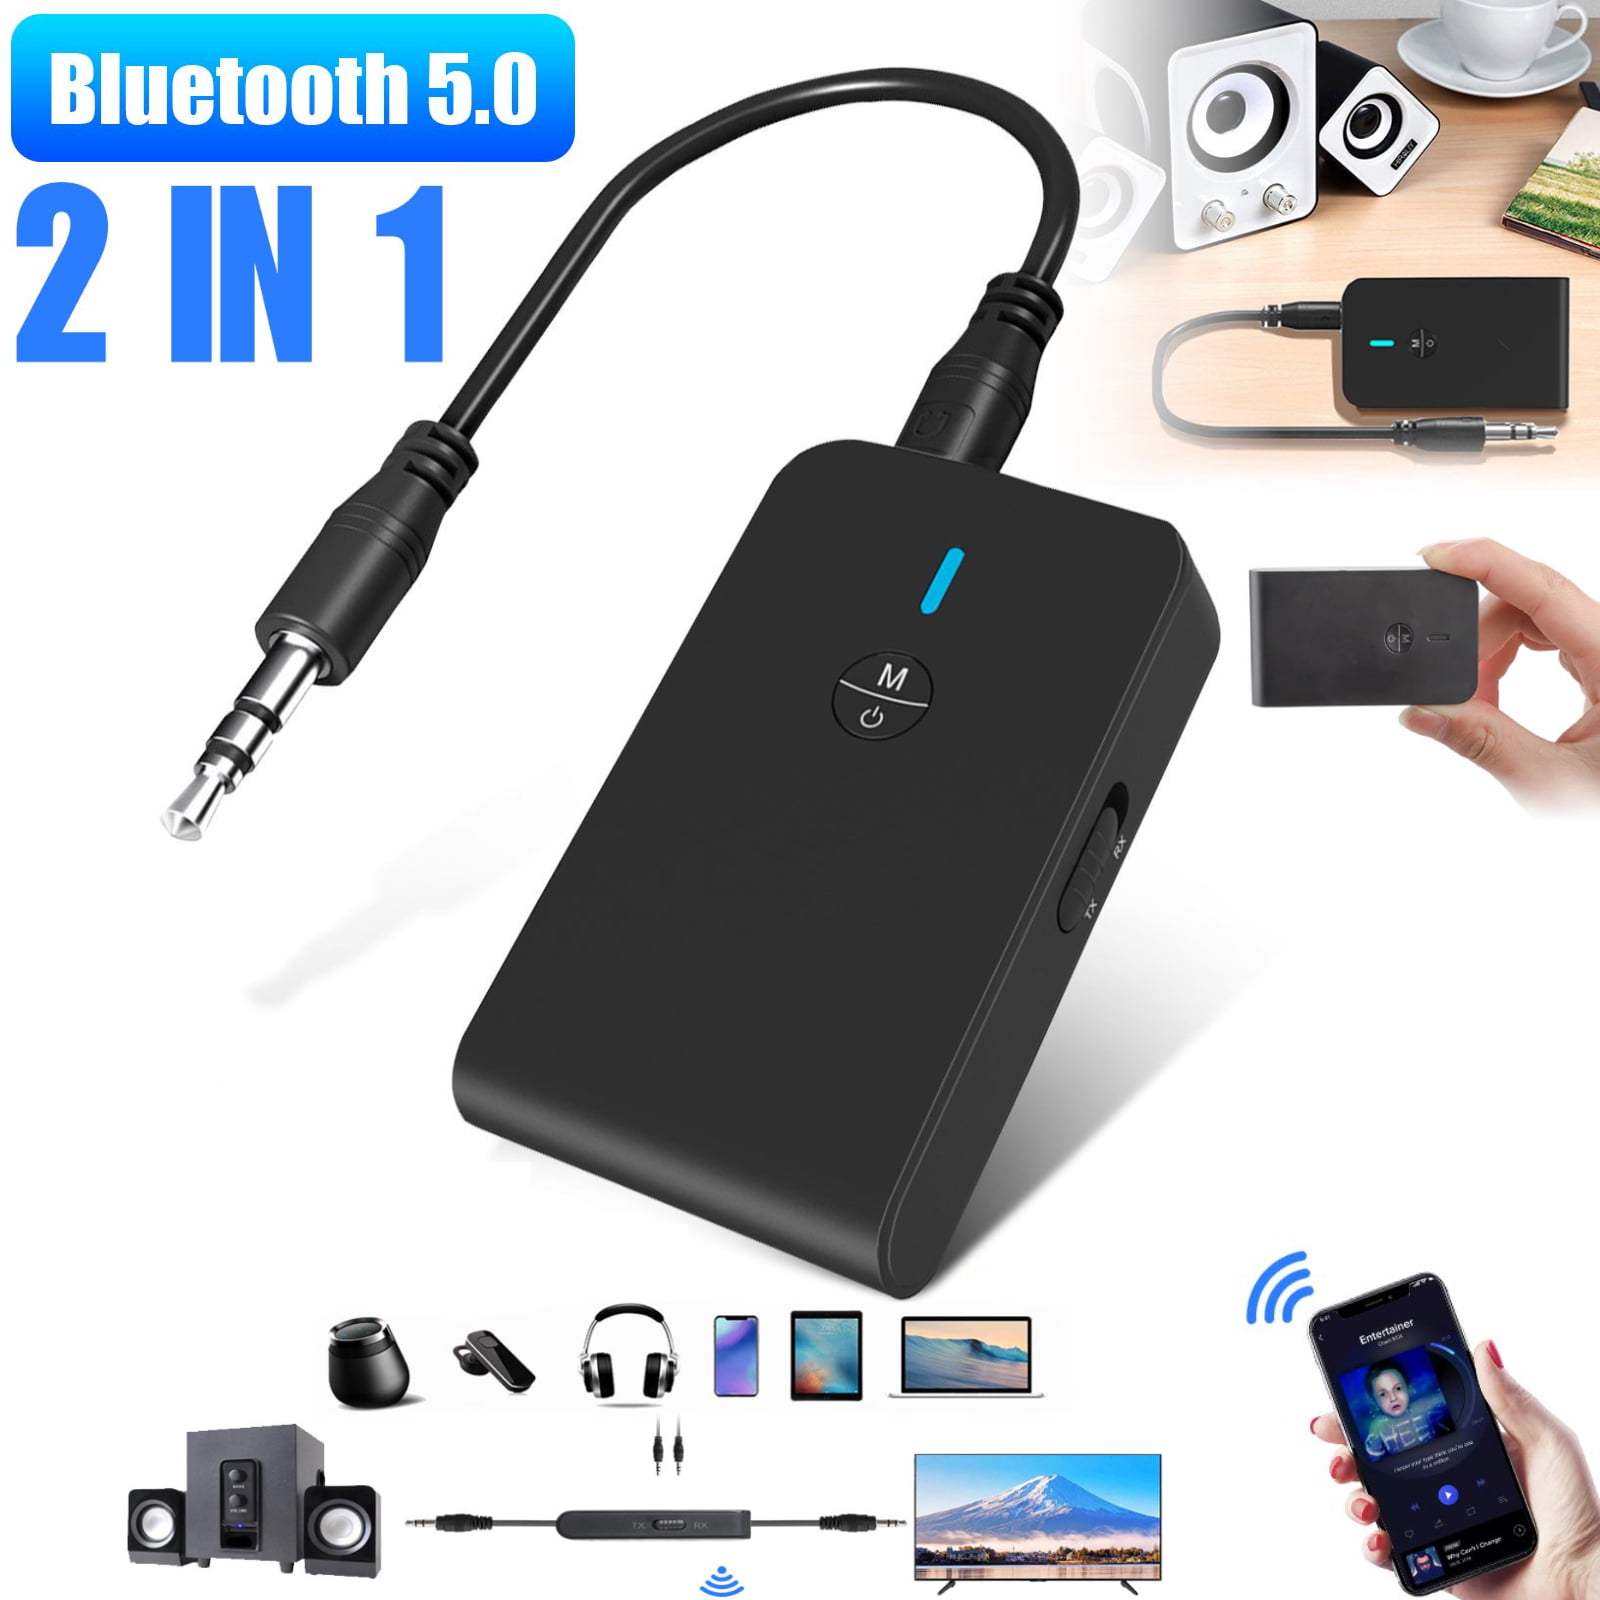 Home TV Wireless Bluetooth Transmitter And Receiver 2-in-1 Audio Adapter 